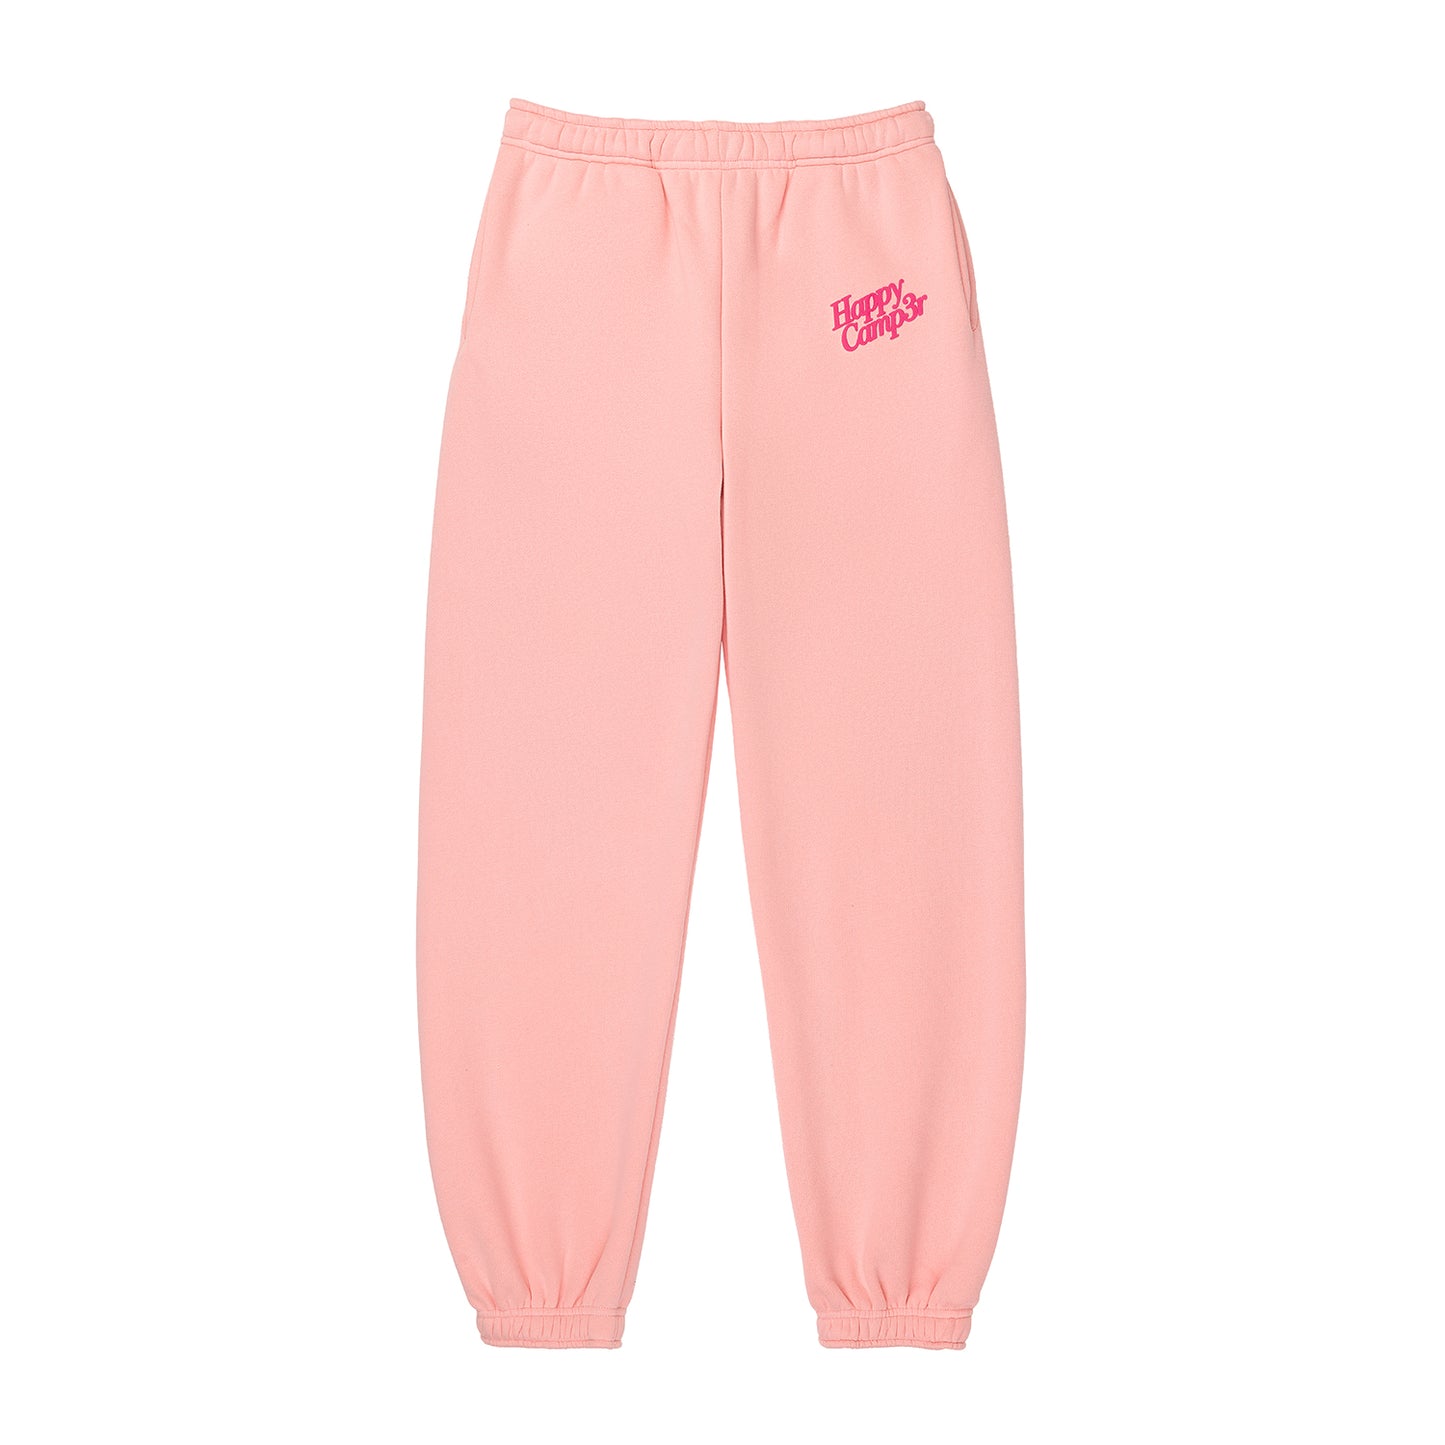 I'll Always Love Sweatpants - Strawberry Pink – The Happy Camp3r